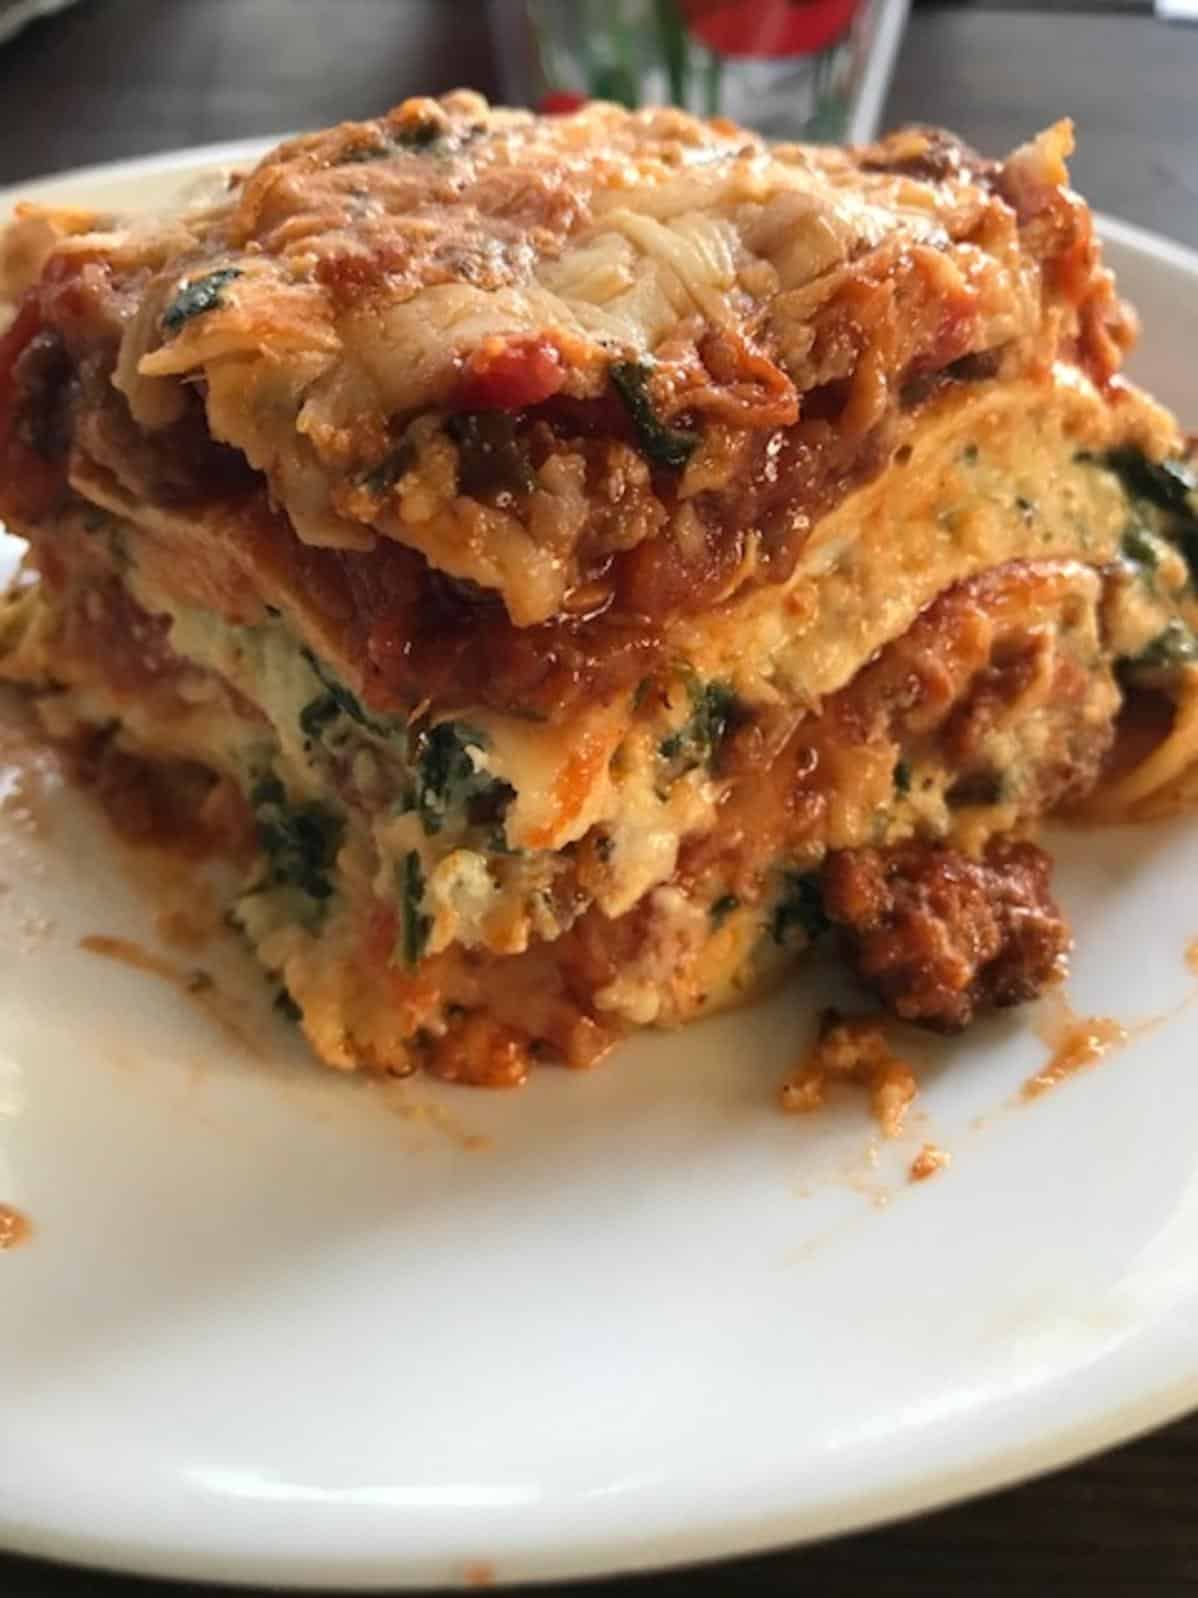  No need to dine out, this lasagna is easy to make at home!